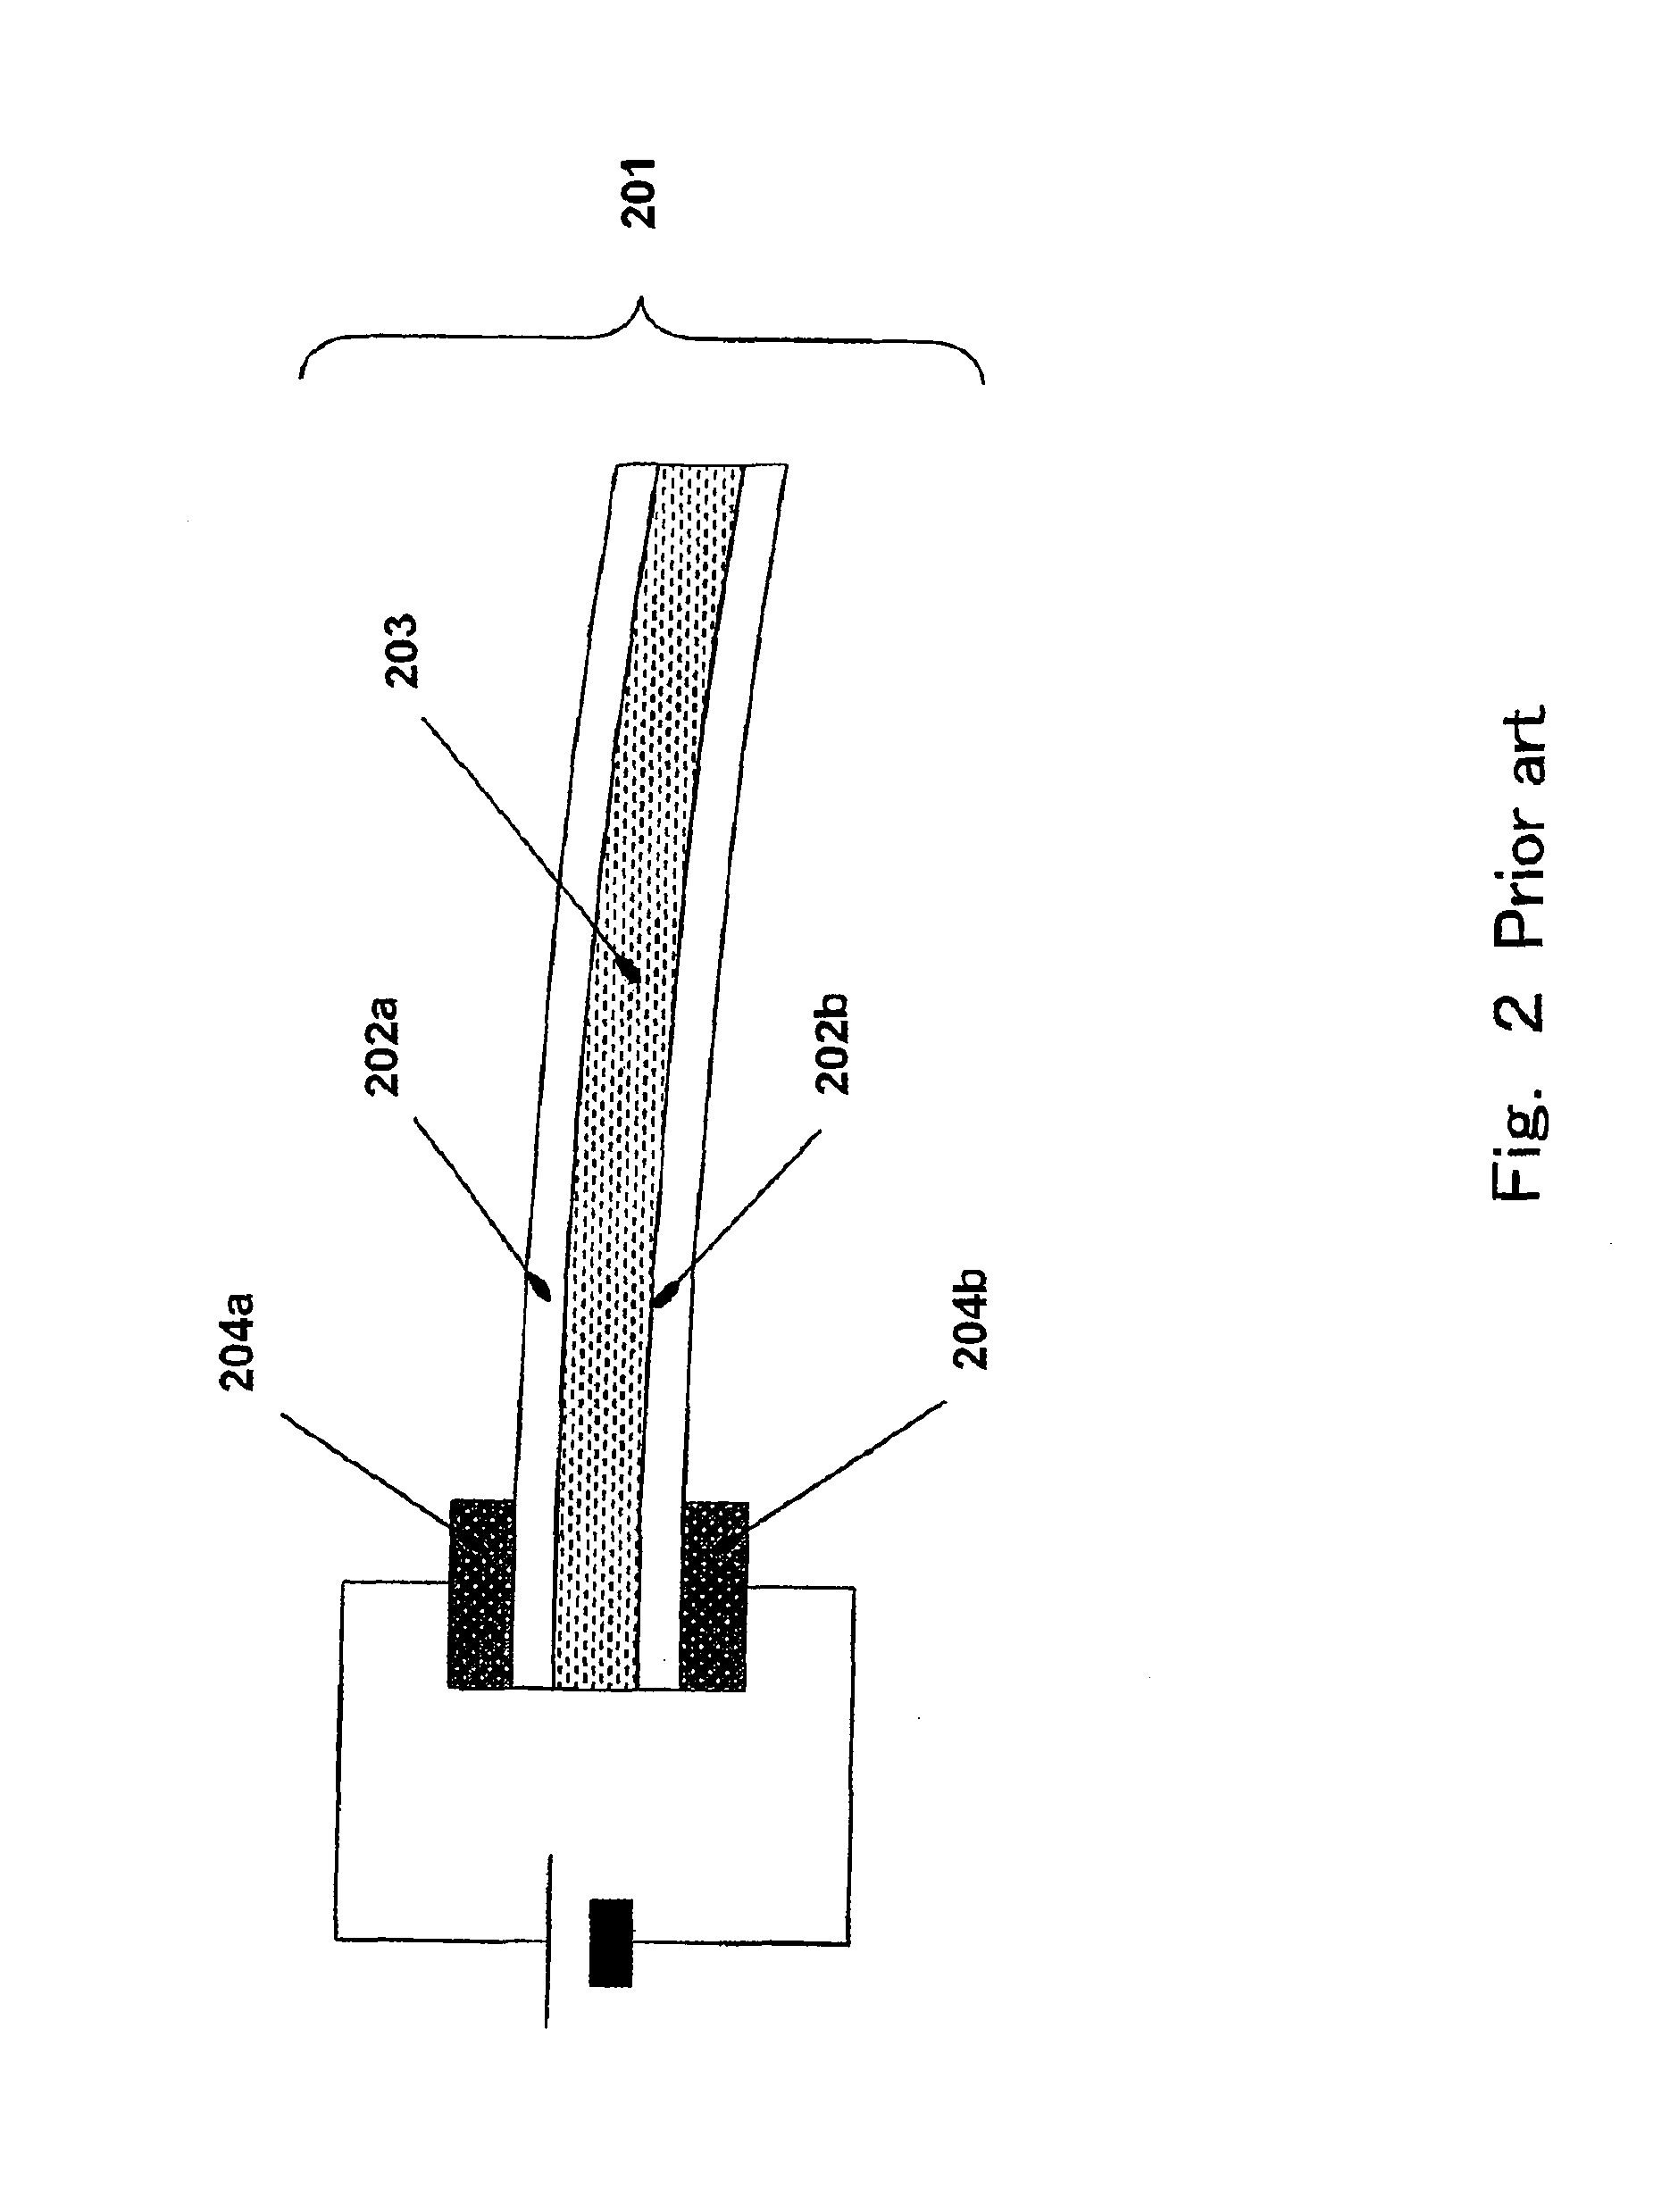 Electrically conductive polymer actuator, and method for manufacturing the same